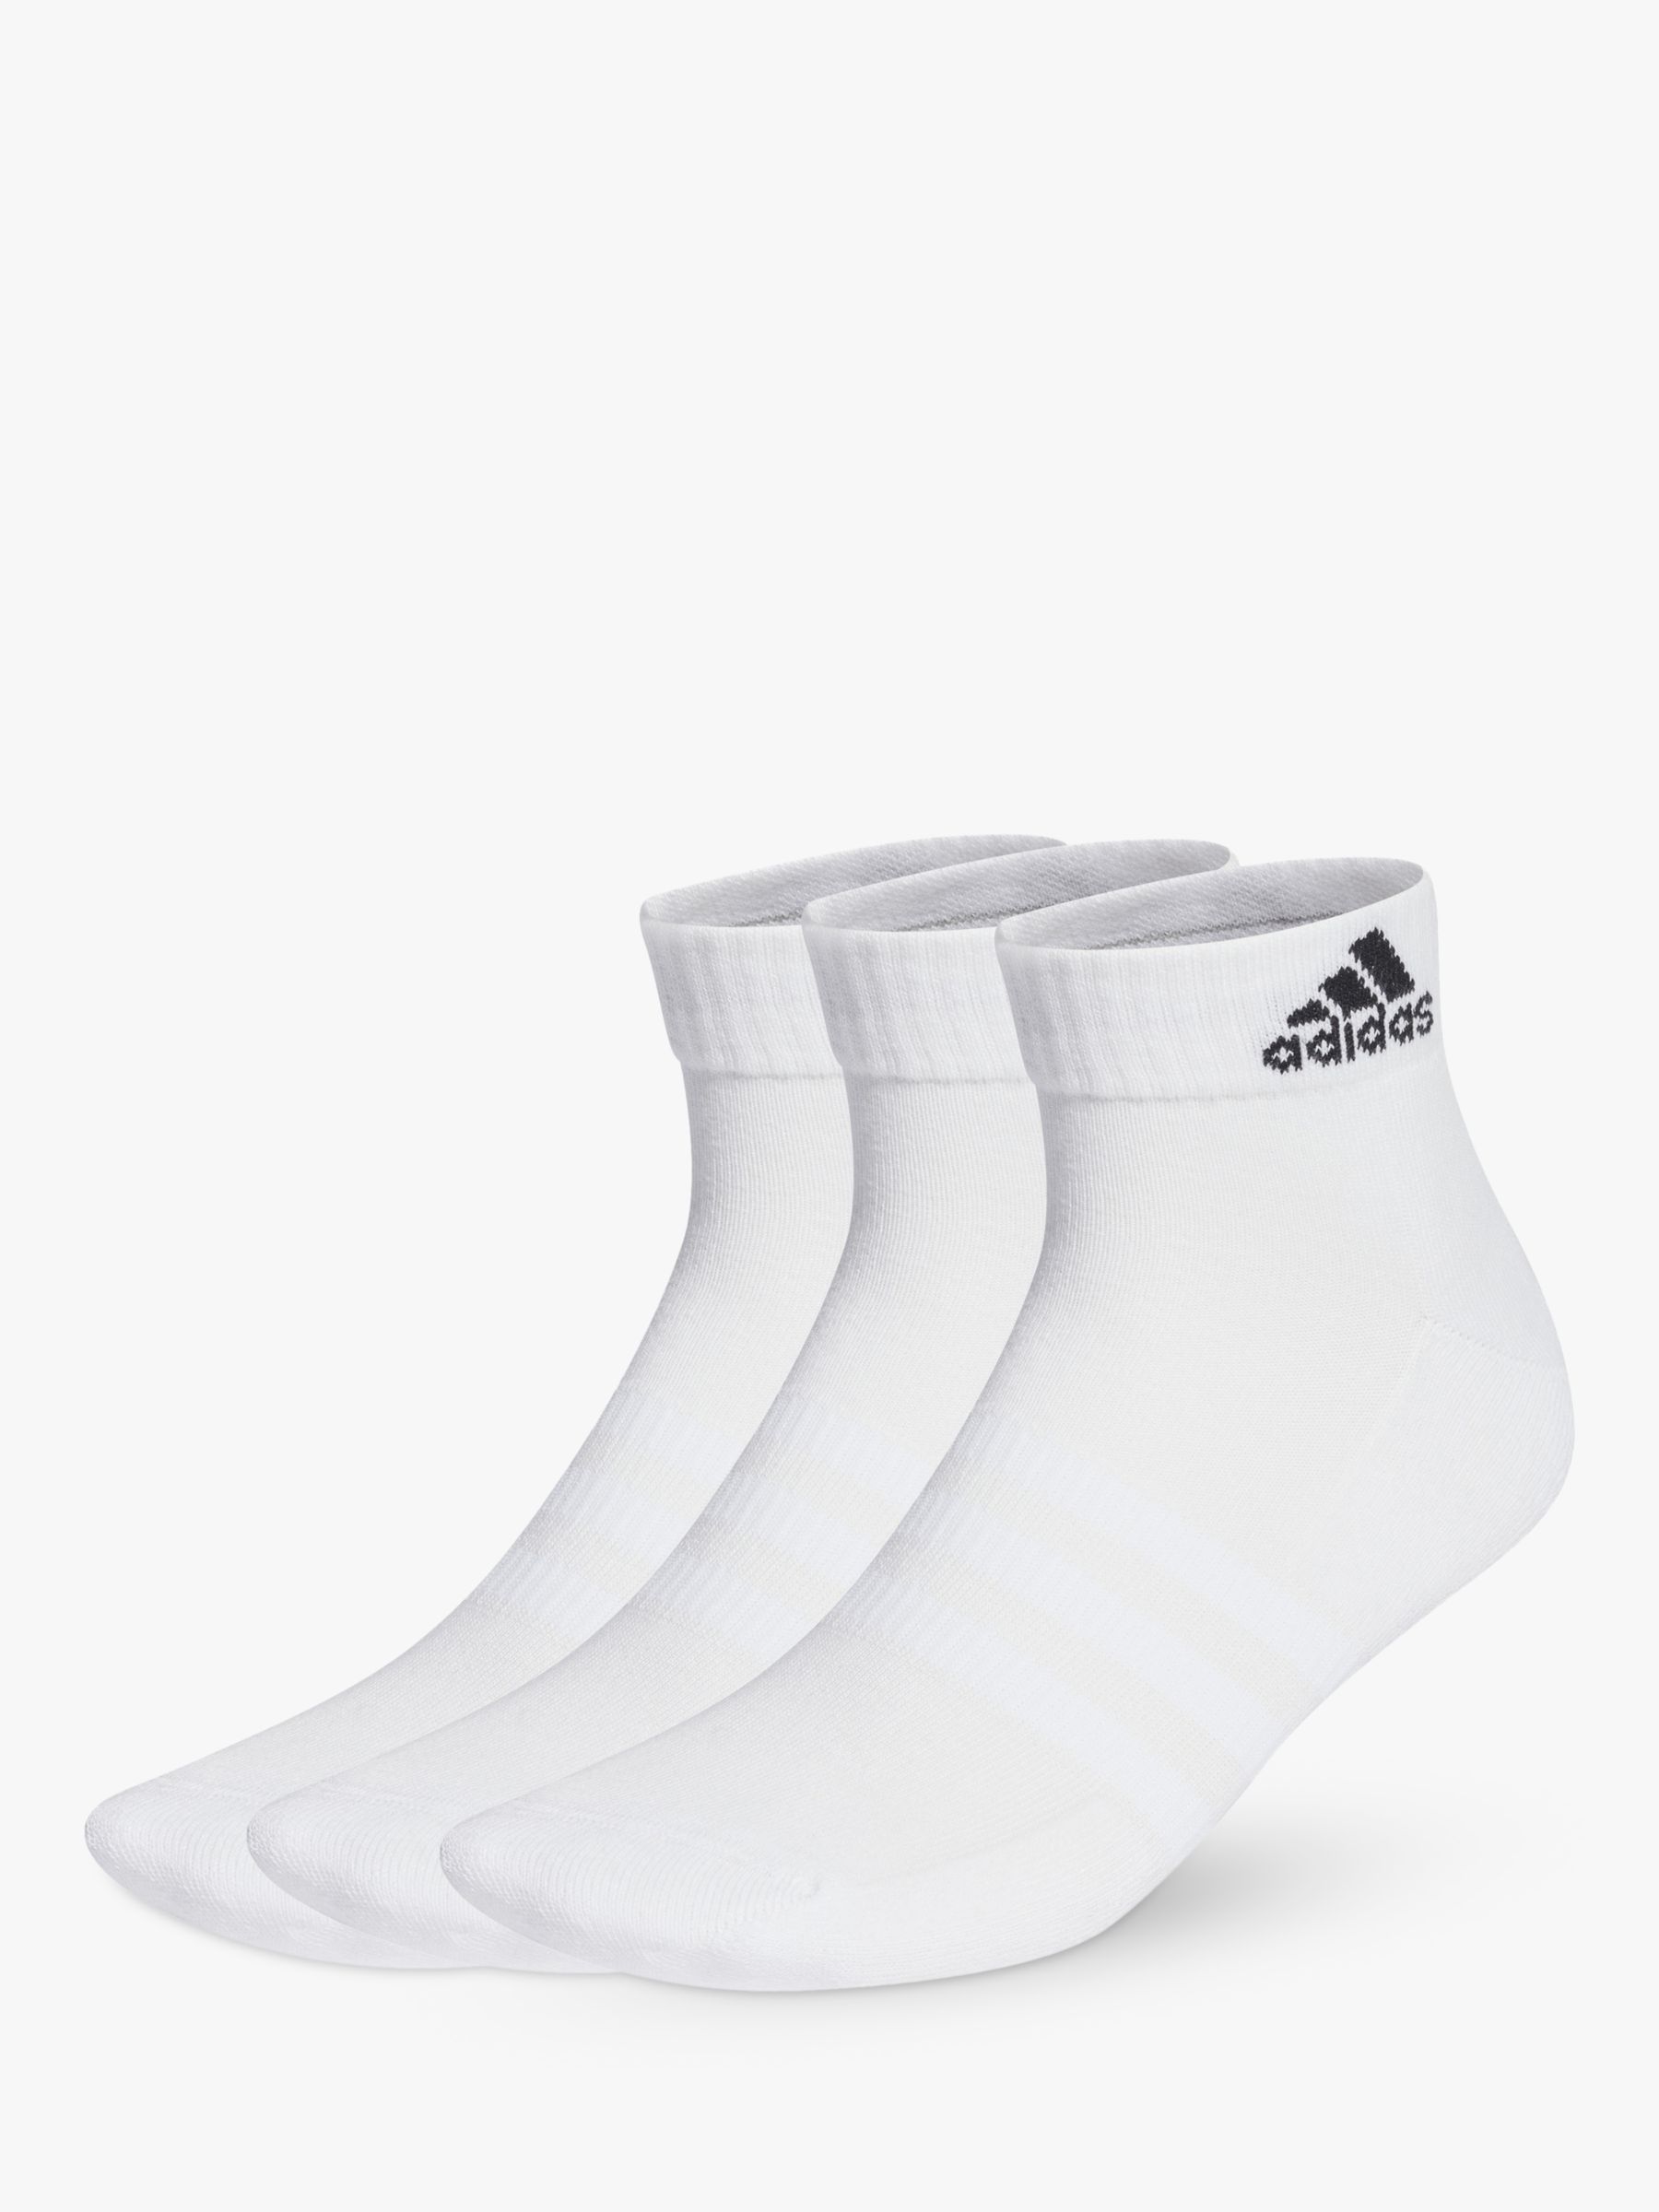 adidas Cushioned Ankle Socks, Pack of 3, White/Black, S